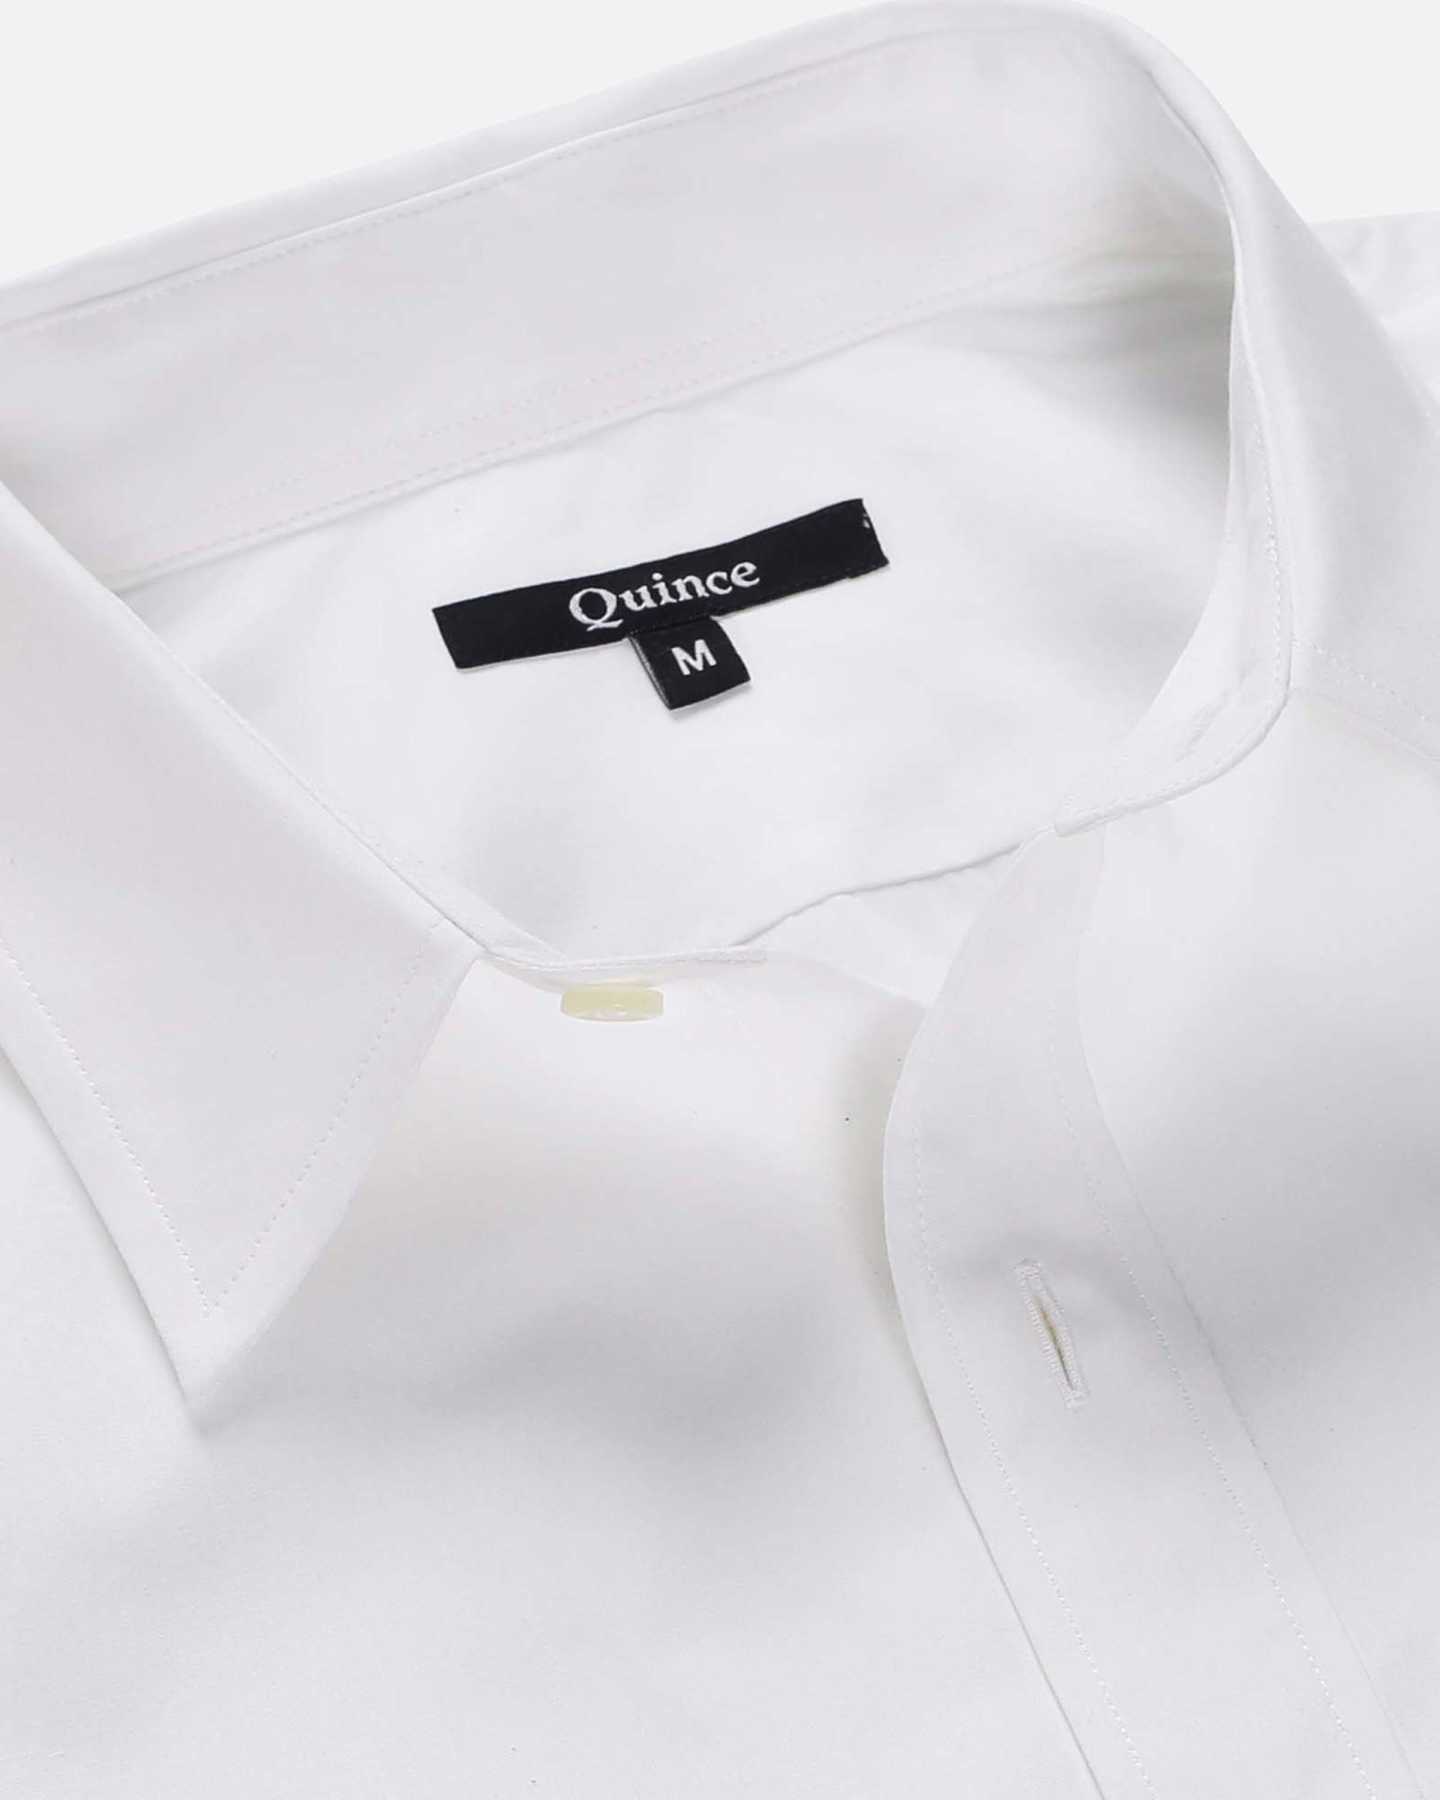 The Untucked Dress Shirt - Solid White - 9 - Thumbnail